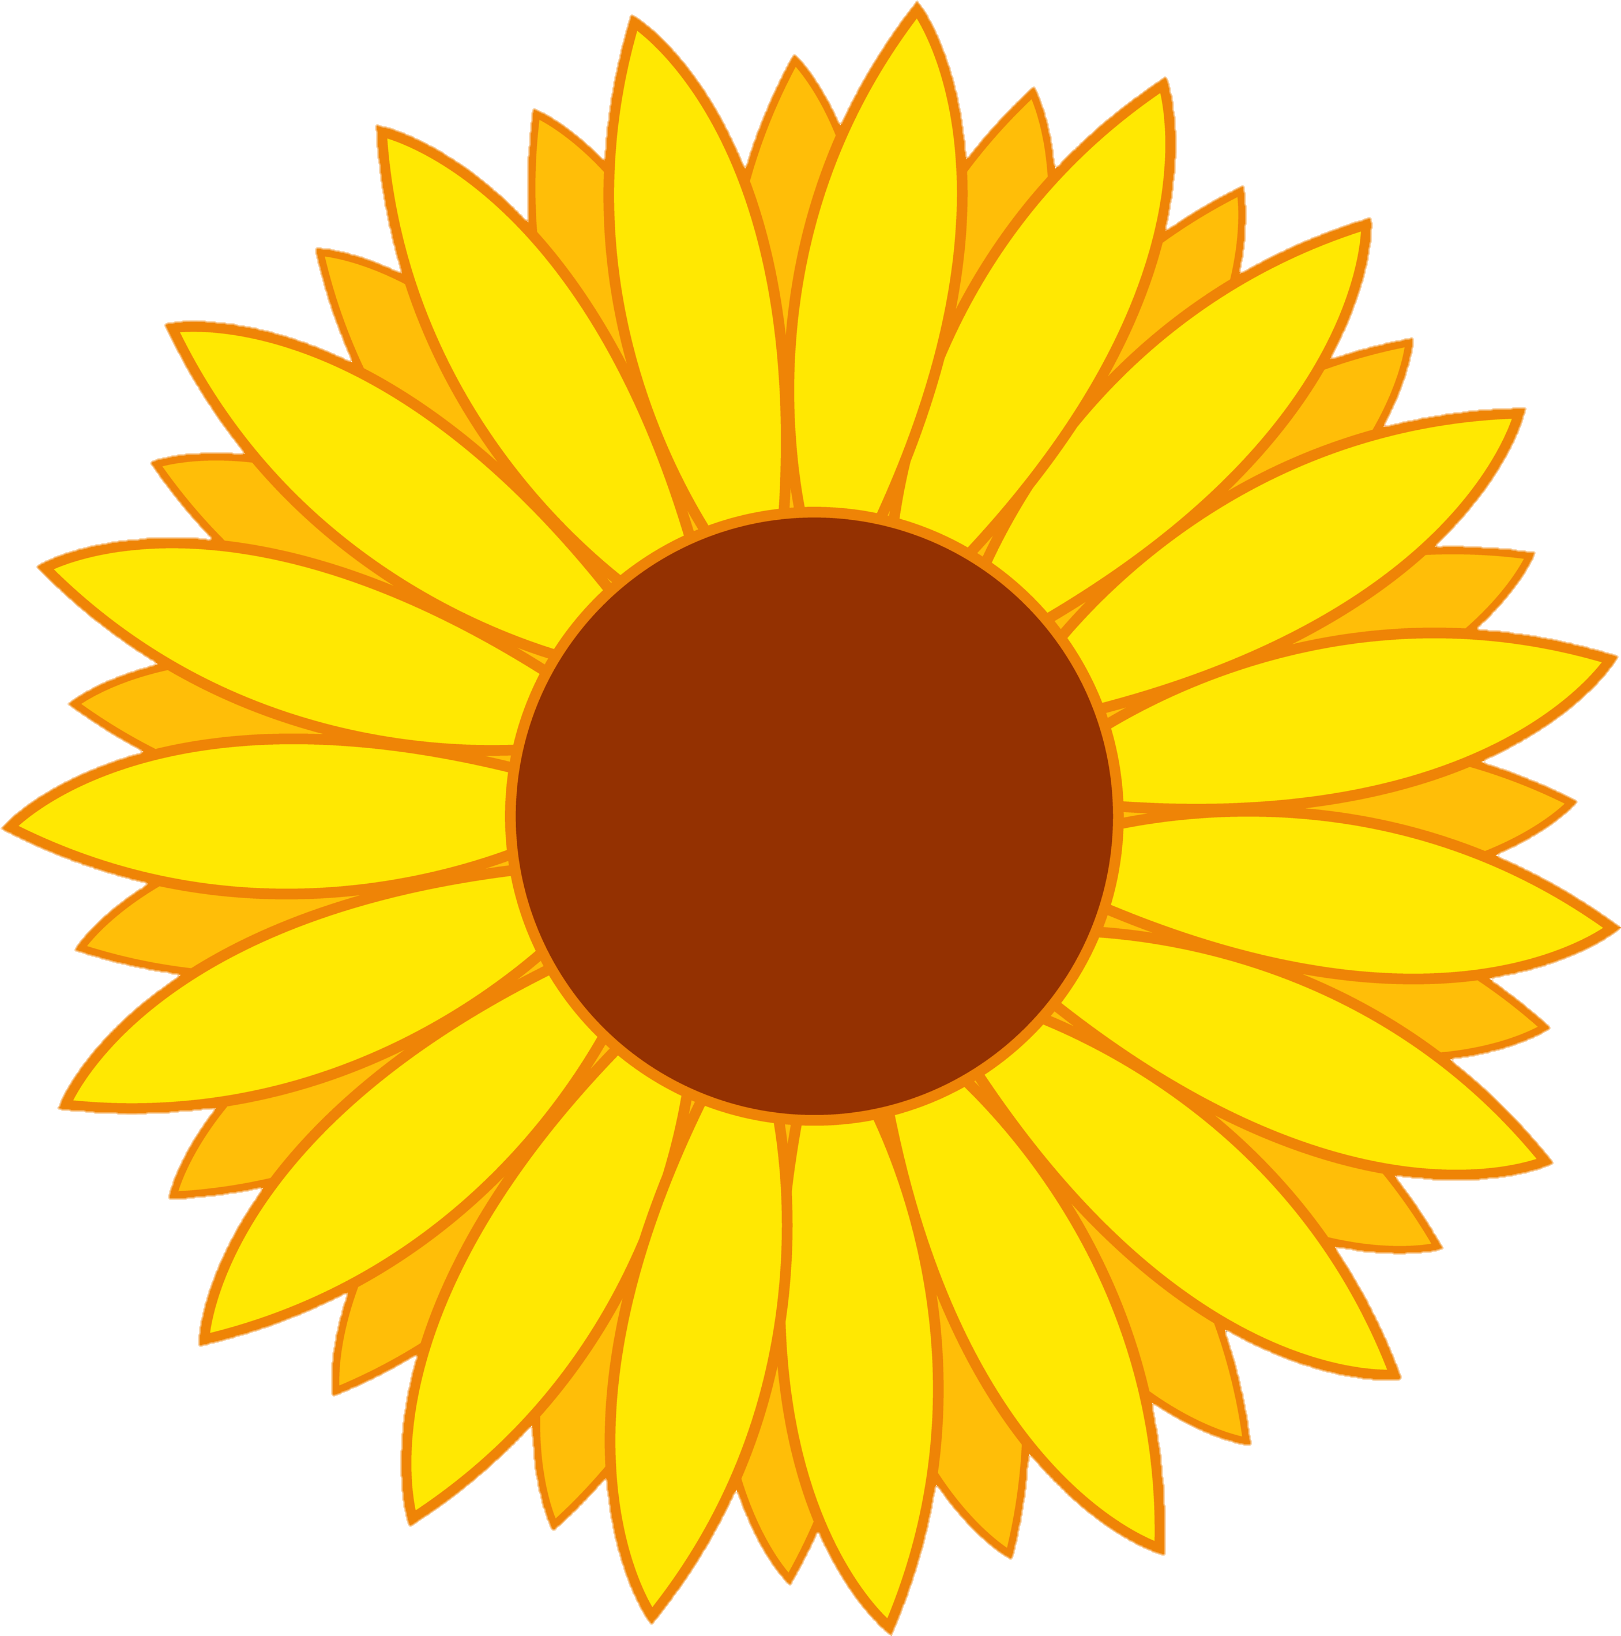 sunflower-png-image-from-pngfre-25